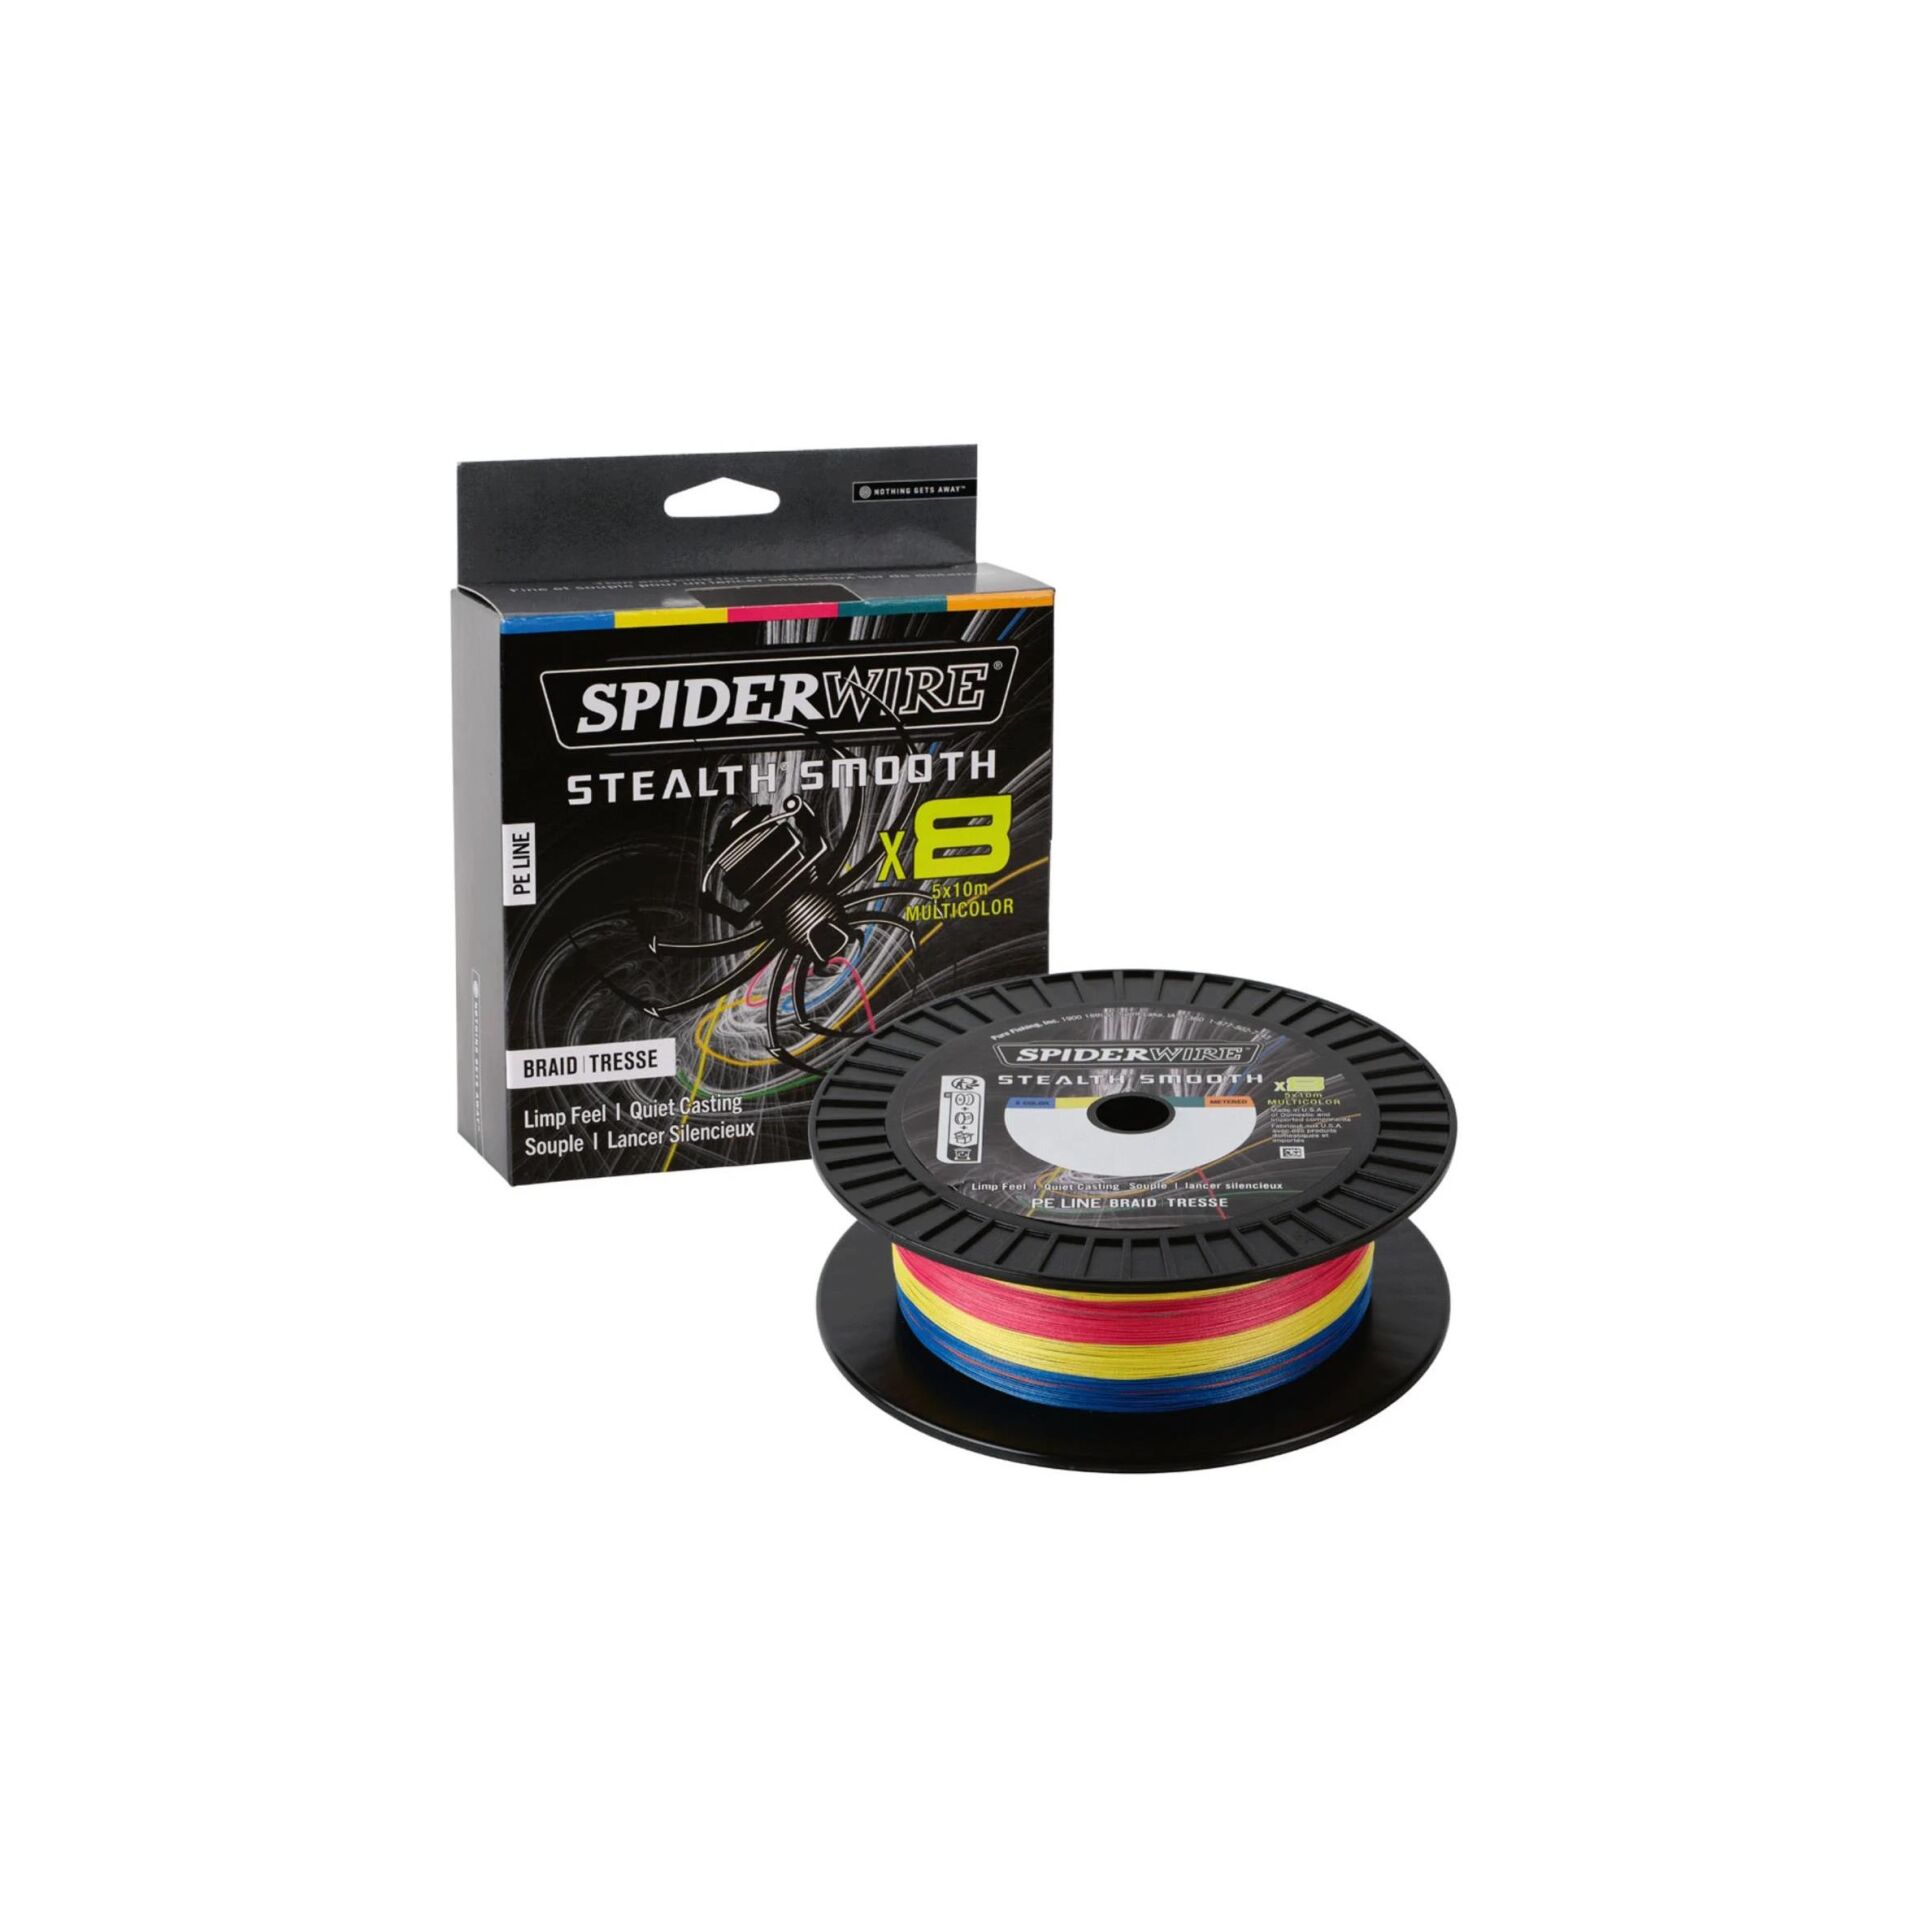 Spider Wire Stealth Smooth x8 300 m Multicolour 0.19mm